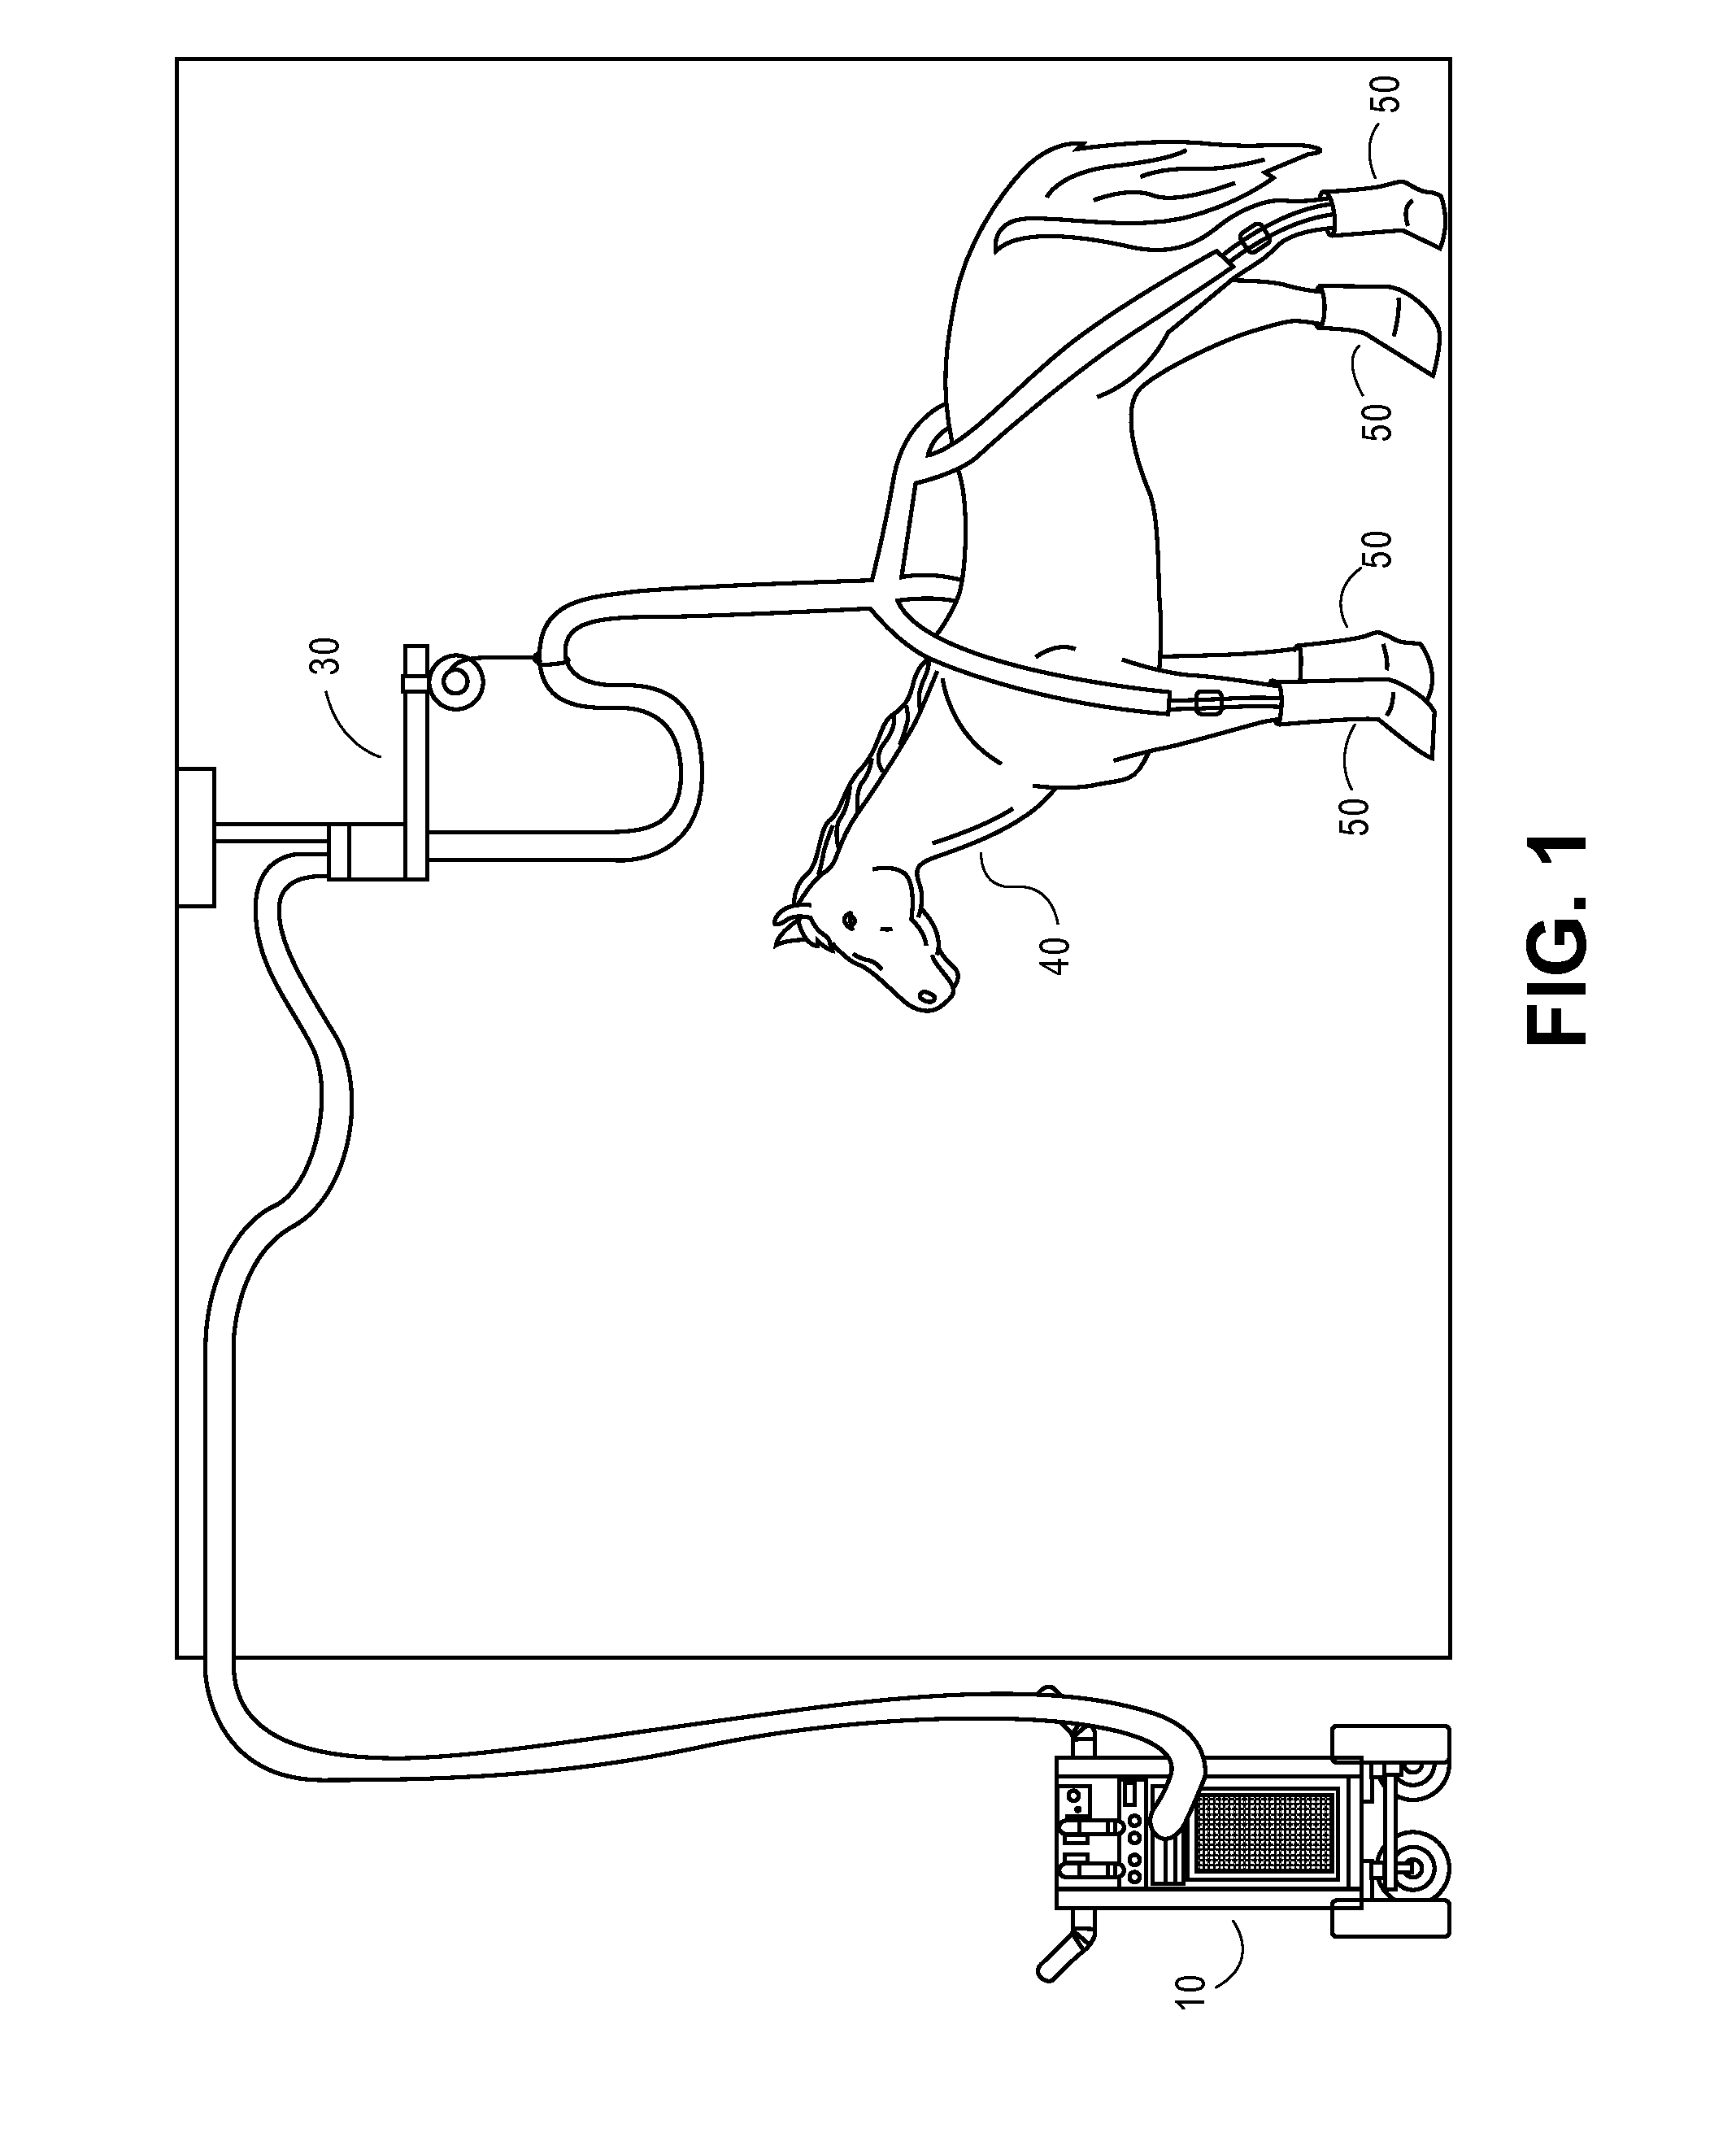 System for providing treatment to a mammal